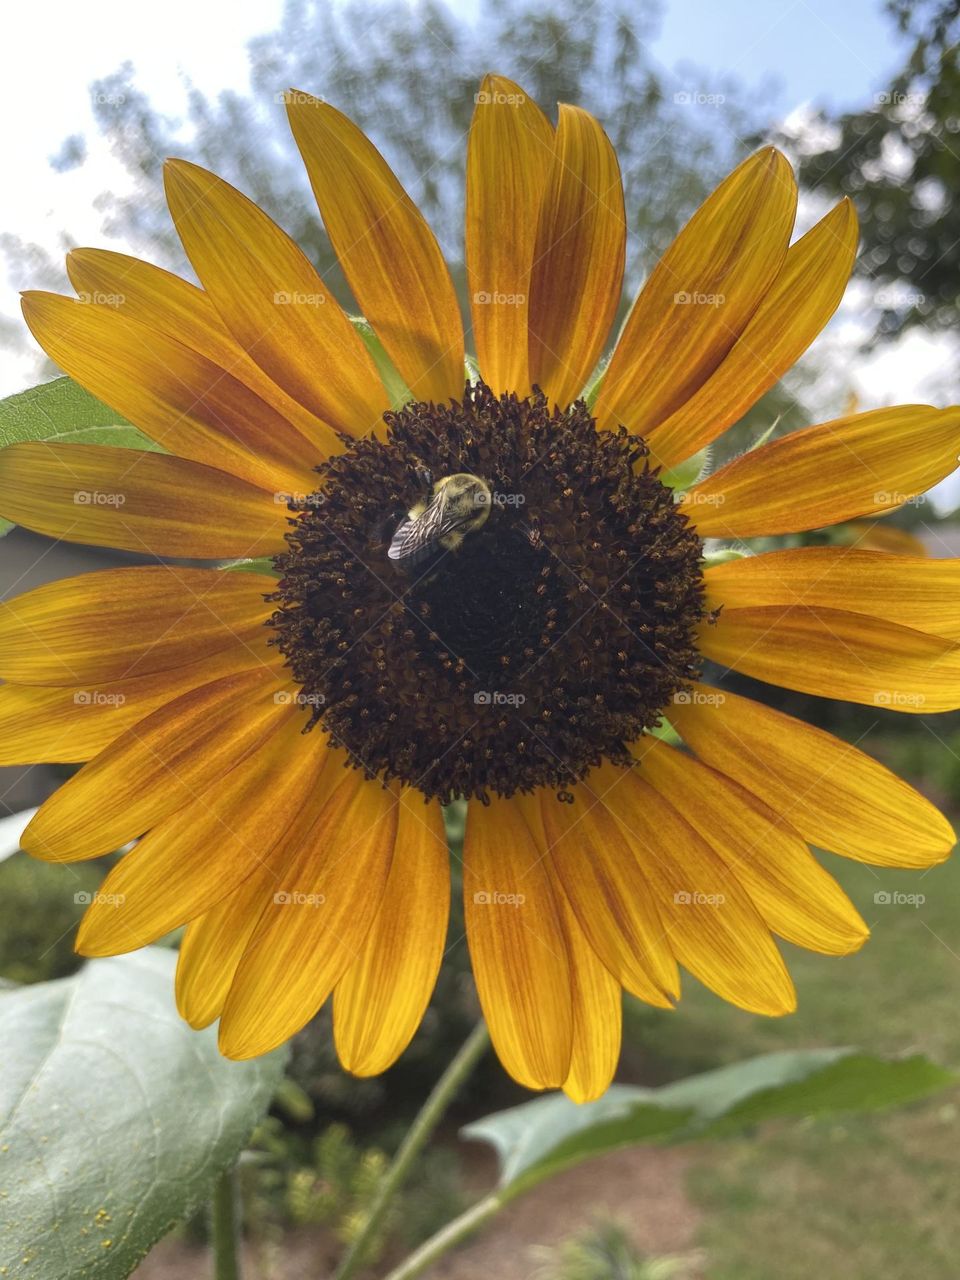 Bumble bee chillin on this sunflower on this beautiful hot day 